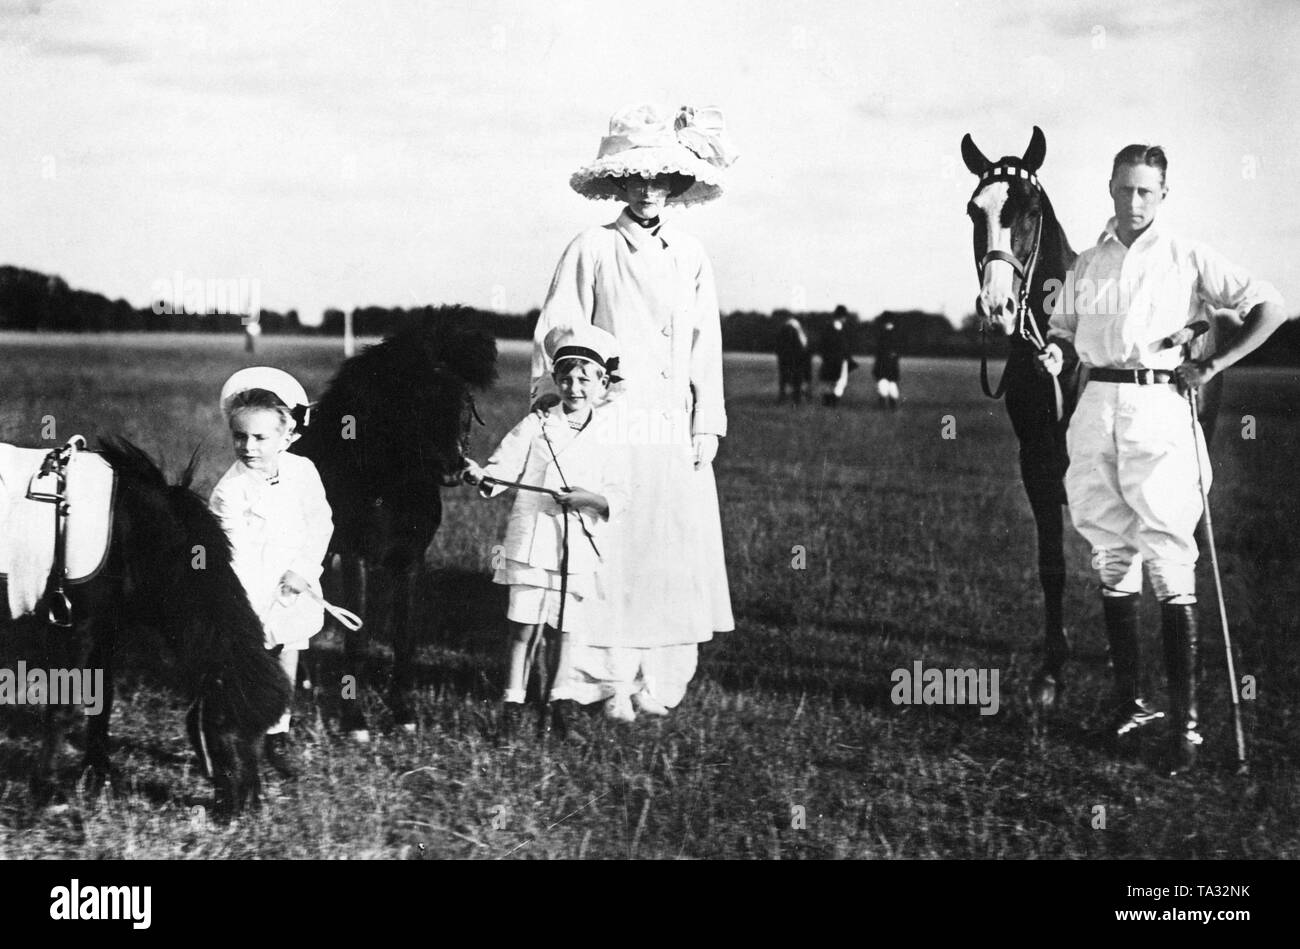 From left to right: Prince Louis Ferdinand, Prince William, Crown Prince Cecilie, Crown Prince William.  The picture was made probably during a polo game of the Crown Prince. The two children steady their riding ponies while Crown Prince Wilhelm is dressed as a polo player and stands with a racket in his hand next to his horse. Stock Photo